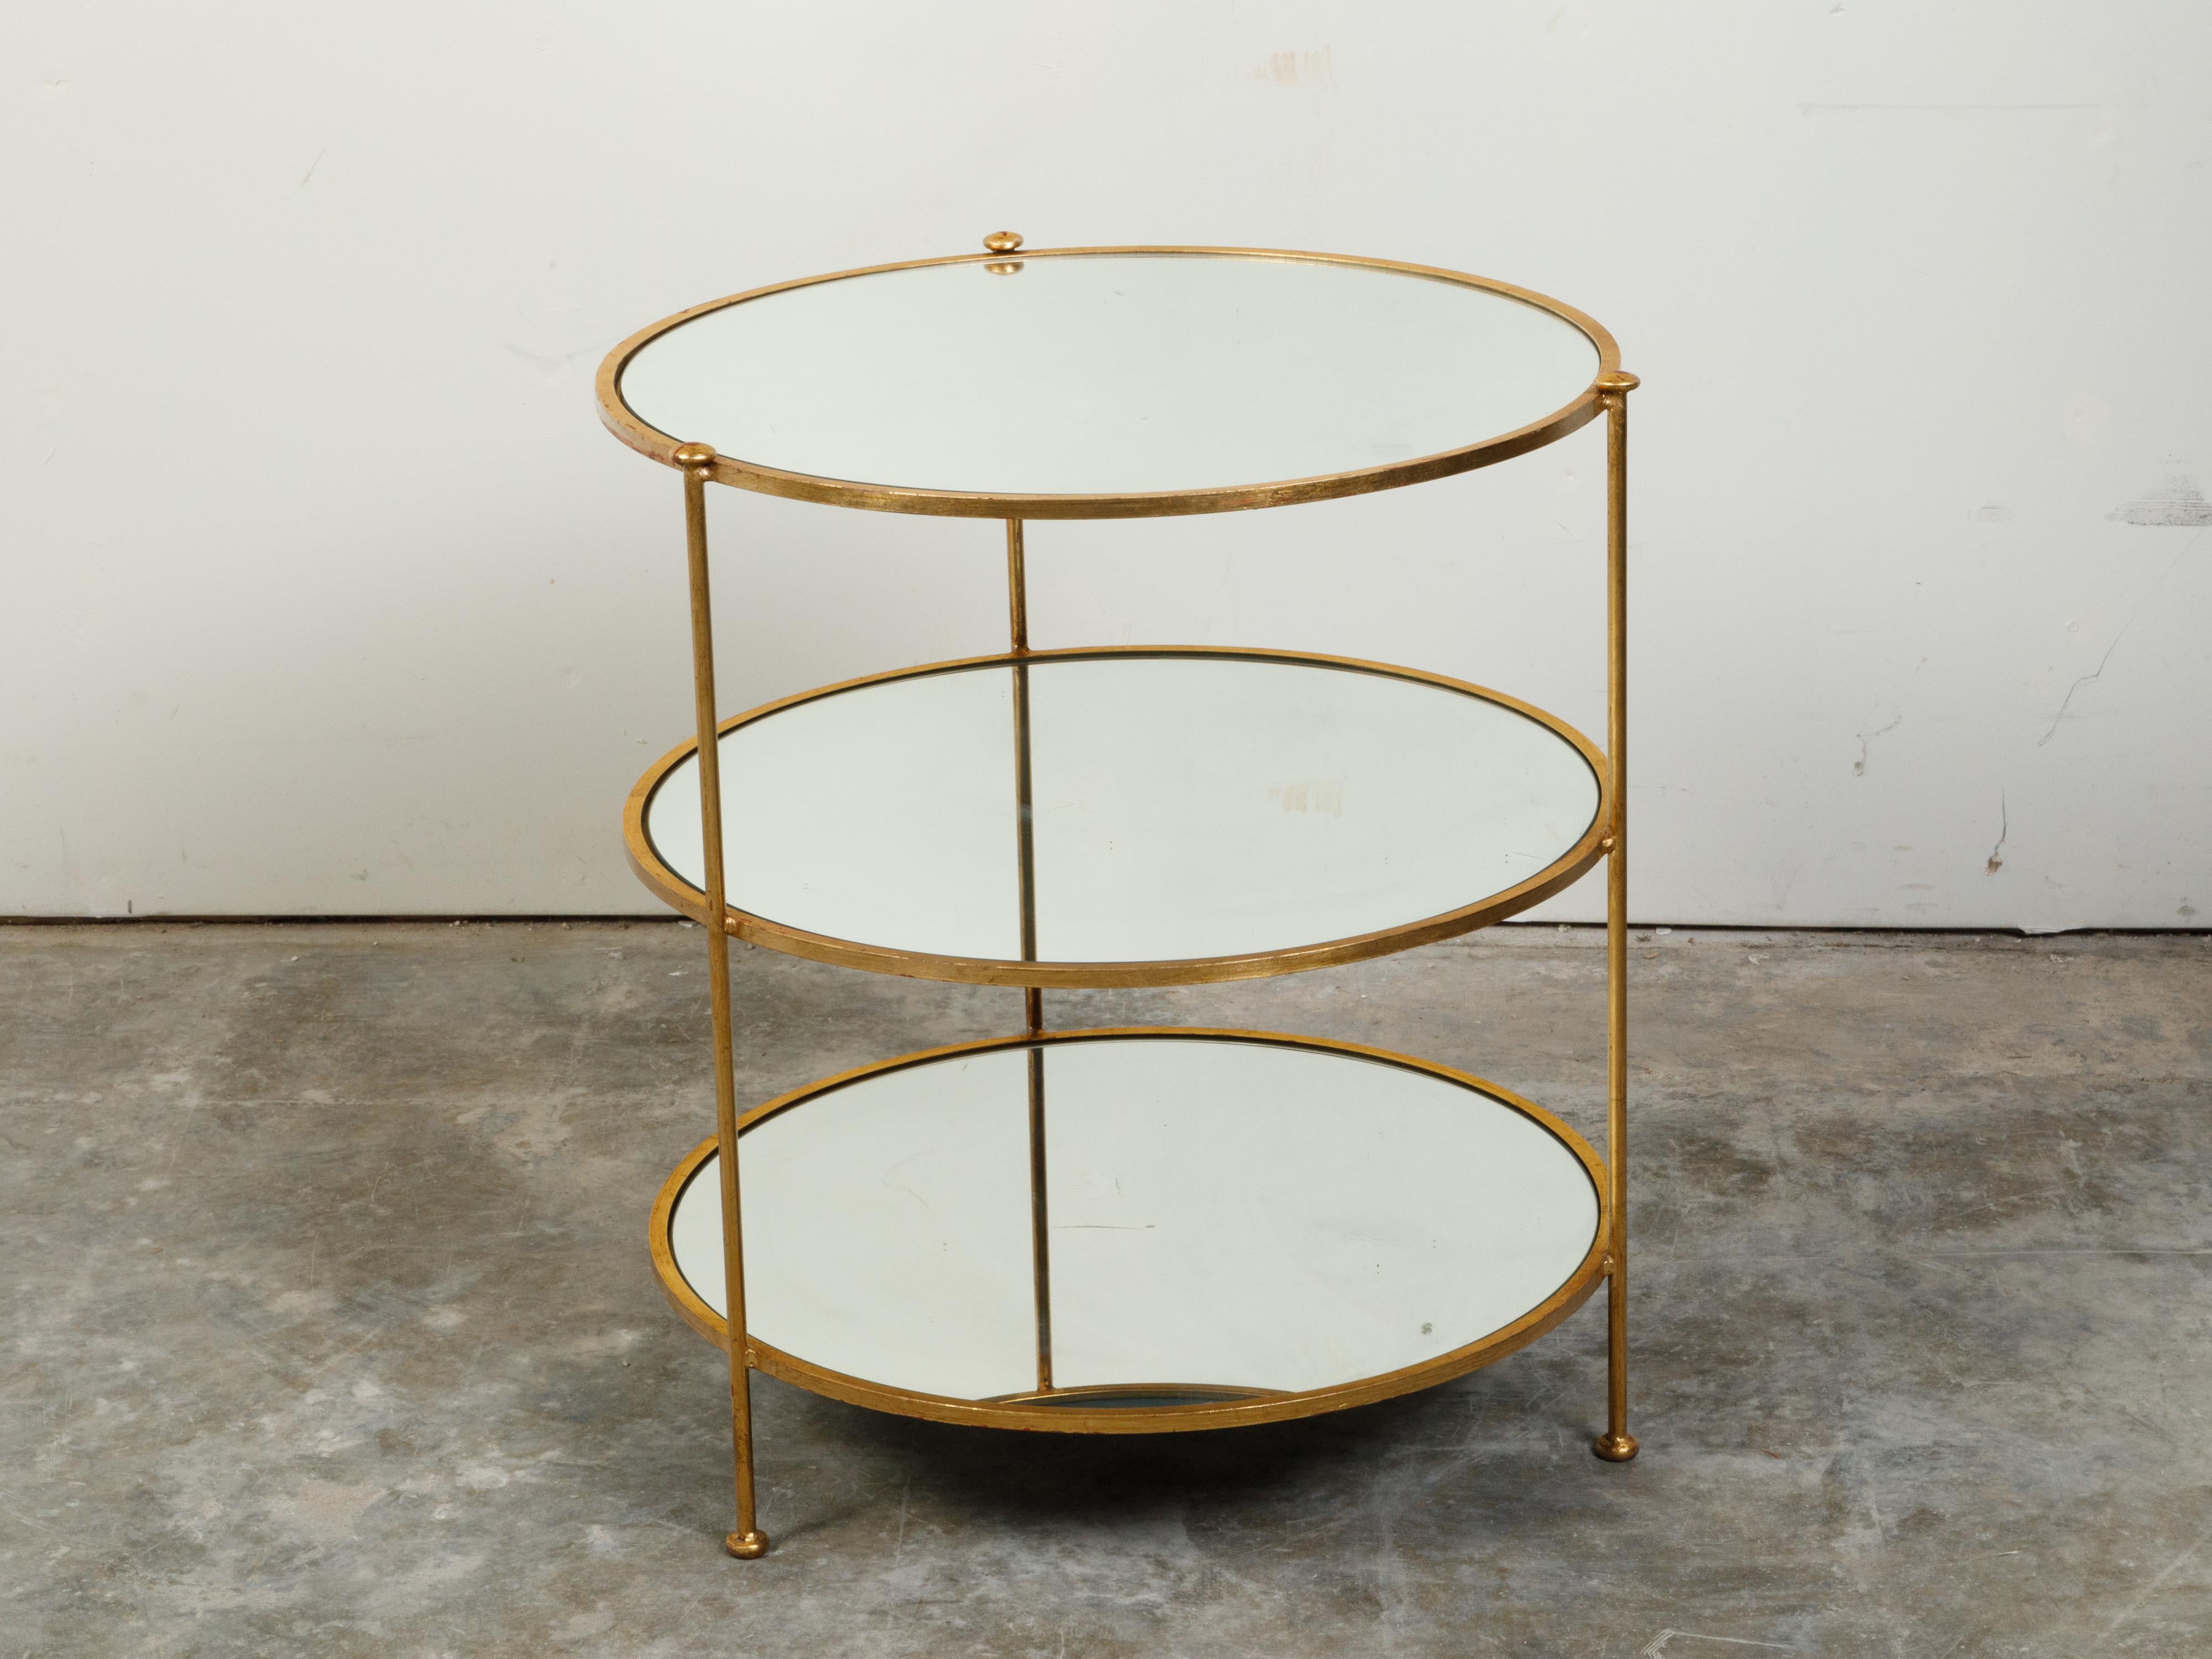 20th Century Italian Midcentury Gilt Iron Three-Tier Side Table with Round Mirrored Shelves For Sale